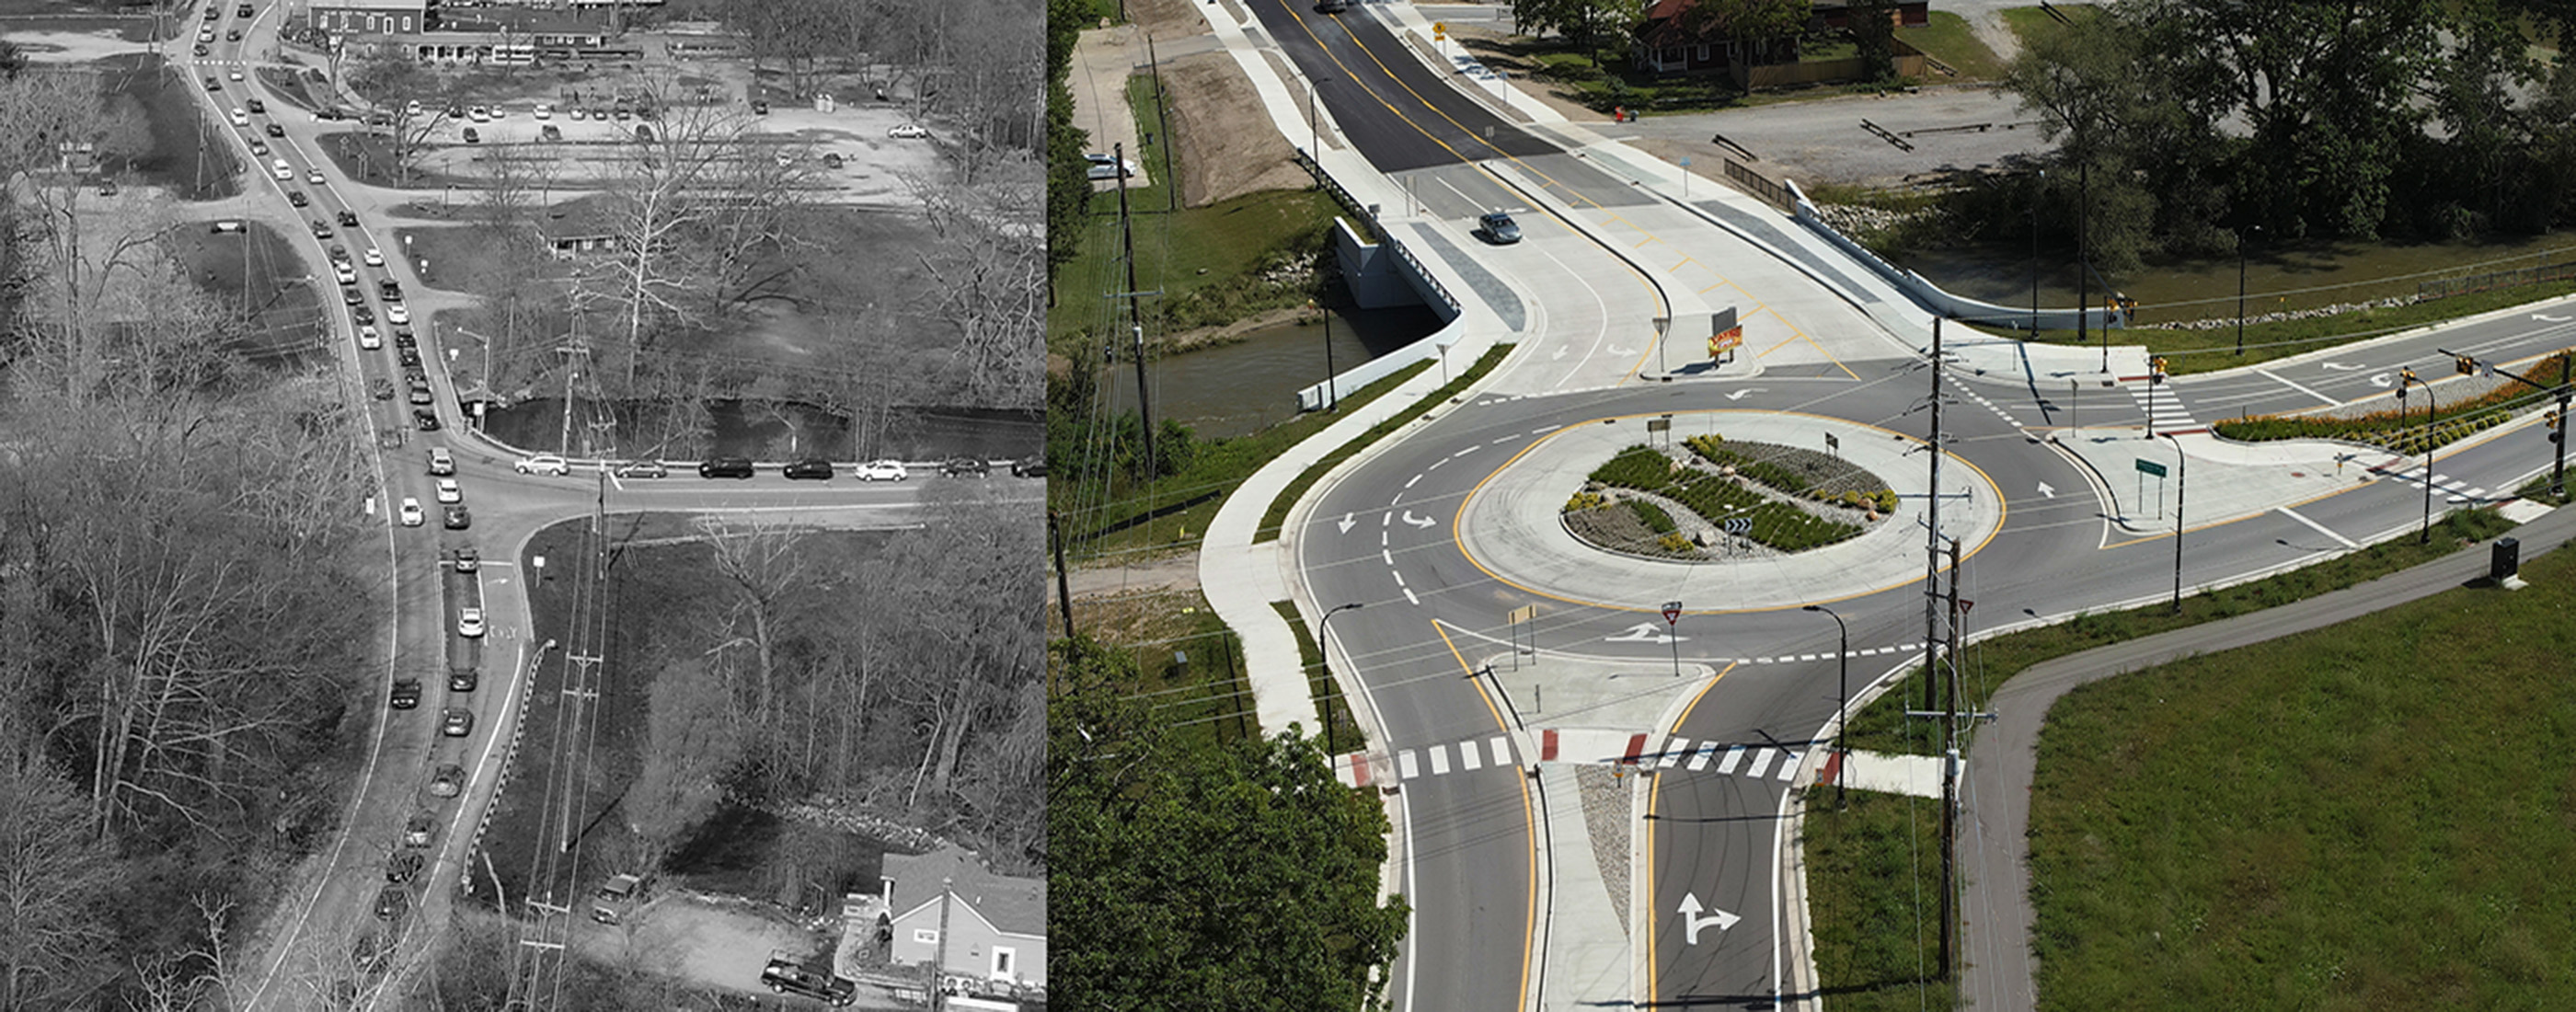 Before and after photos, demonstrating how new solution eliminated mile-long traffic backups and added pedestrian facilities.